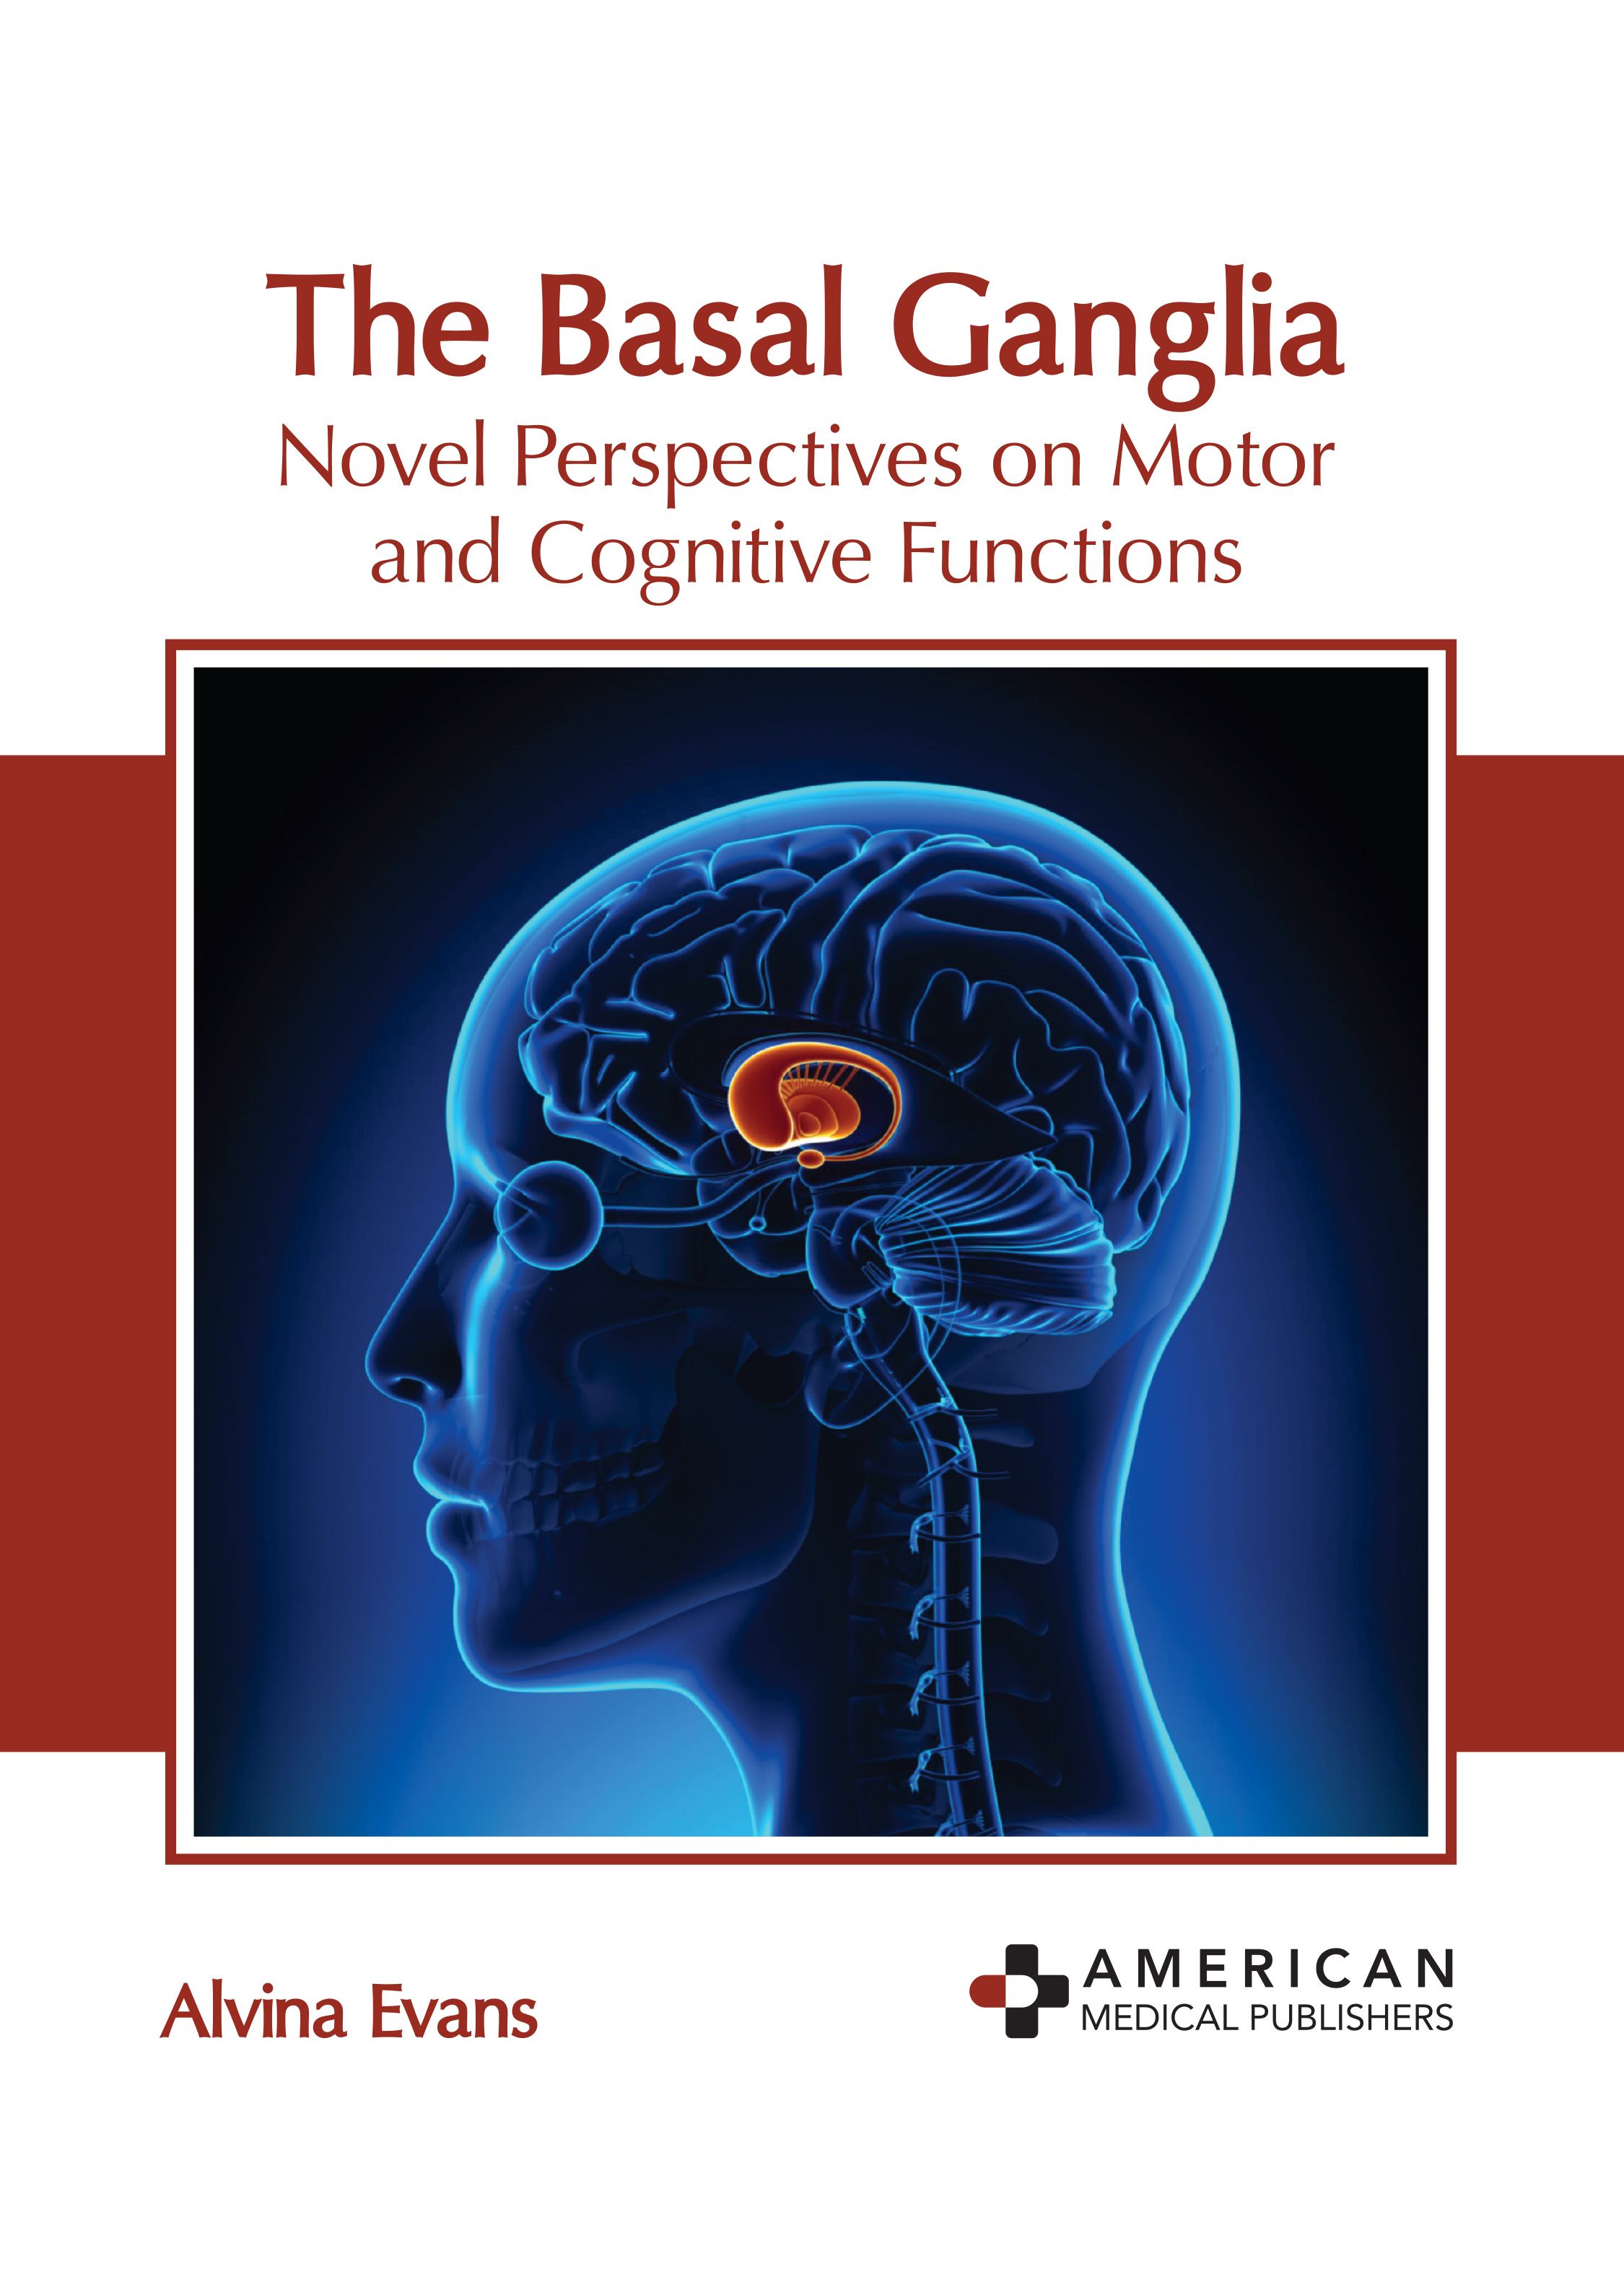 THE BASAL GANGLIA: NOVEL PERSPECTIVES ON MOTOR AND COGNITIVE FUNCTIONS